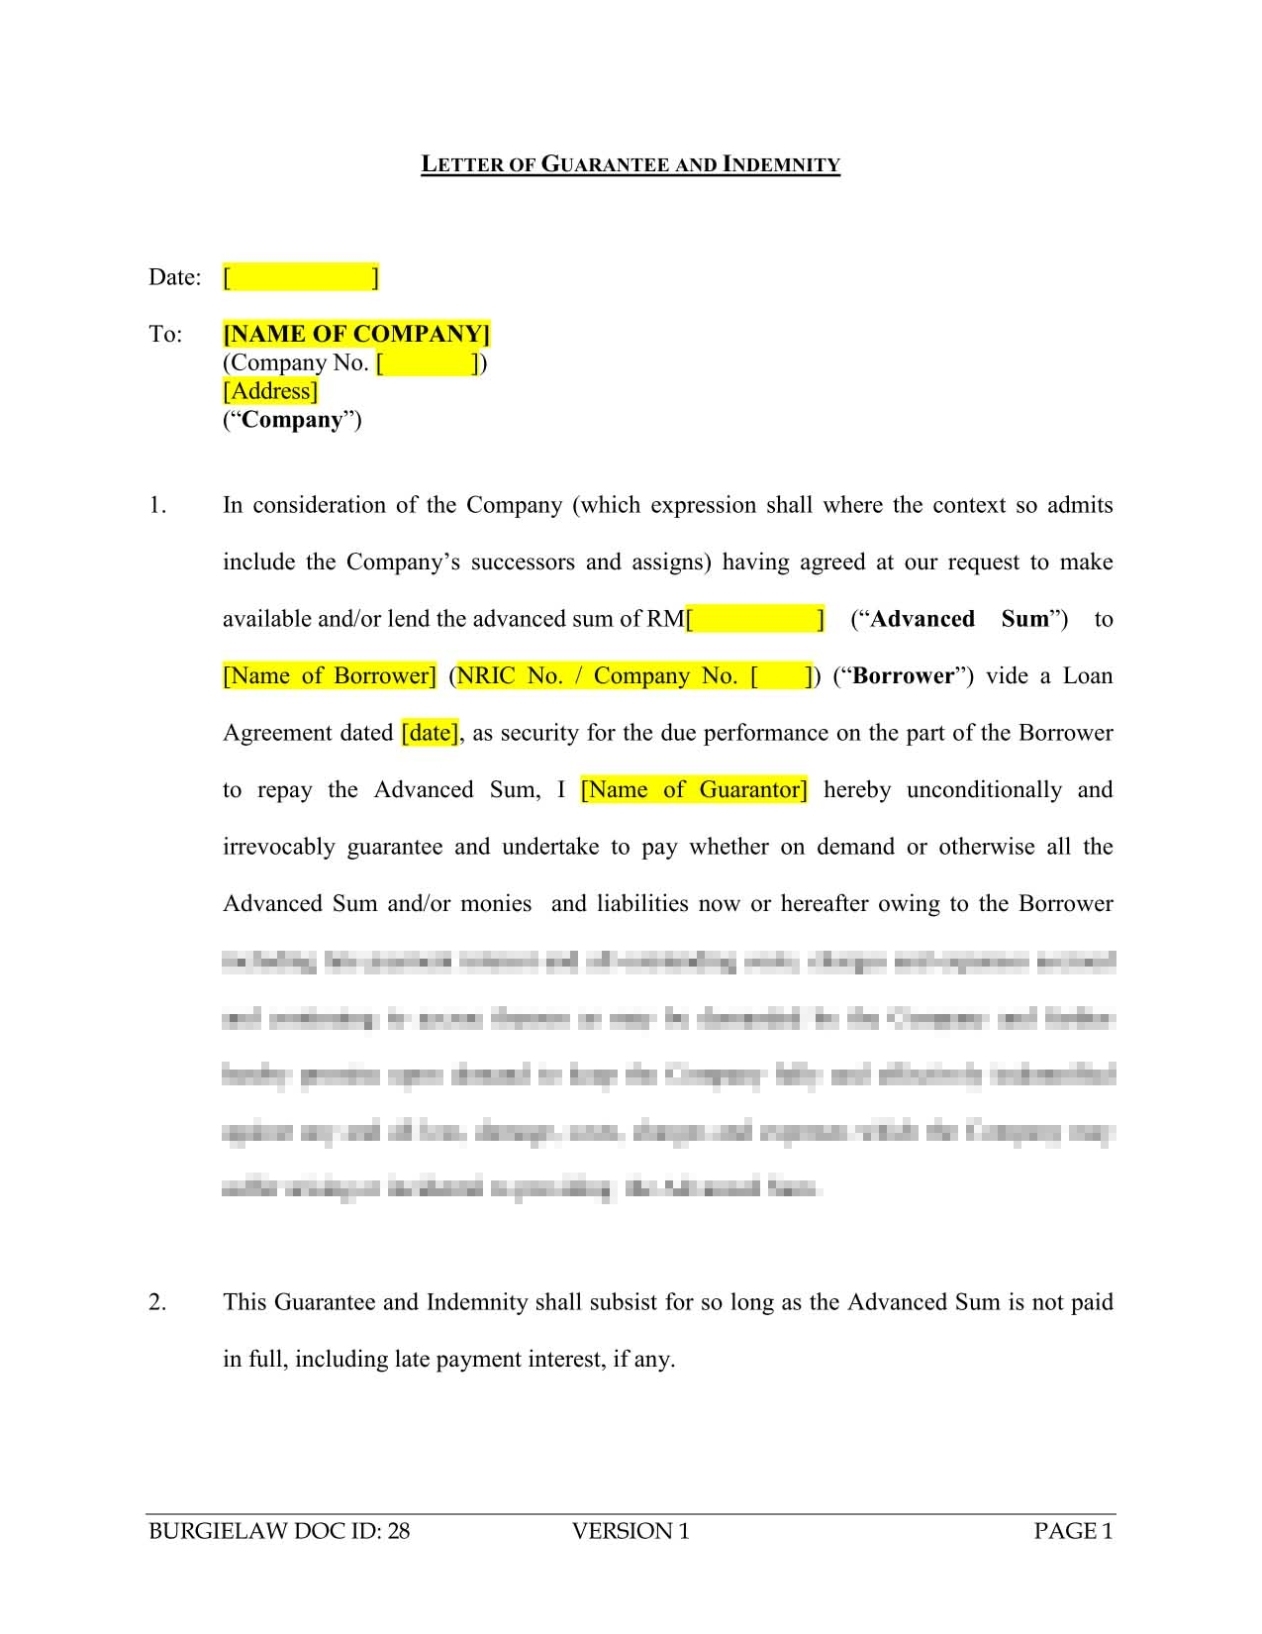 Letter Of Guarantee And Indemnity (Lender) Template - Burgielaw Regarding Letter Of Guarantee Template